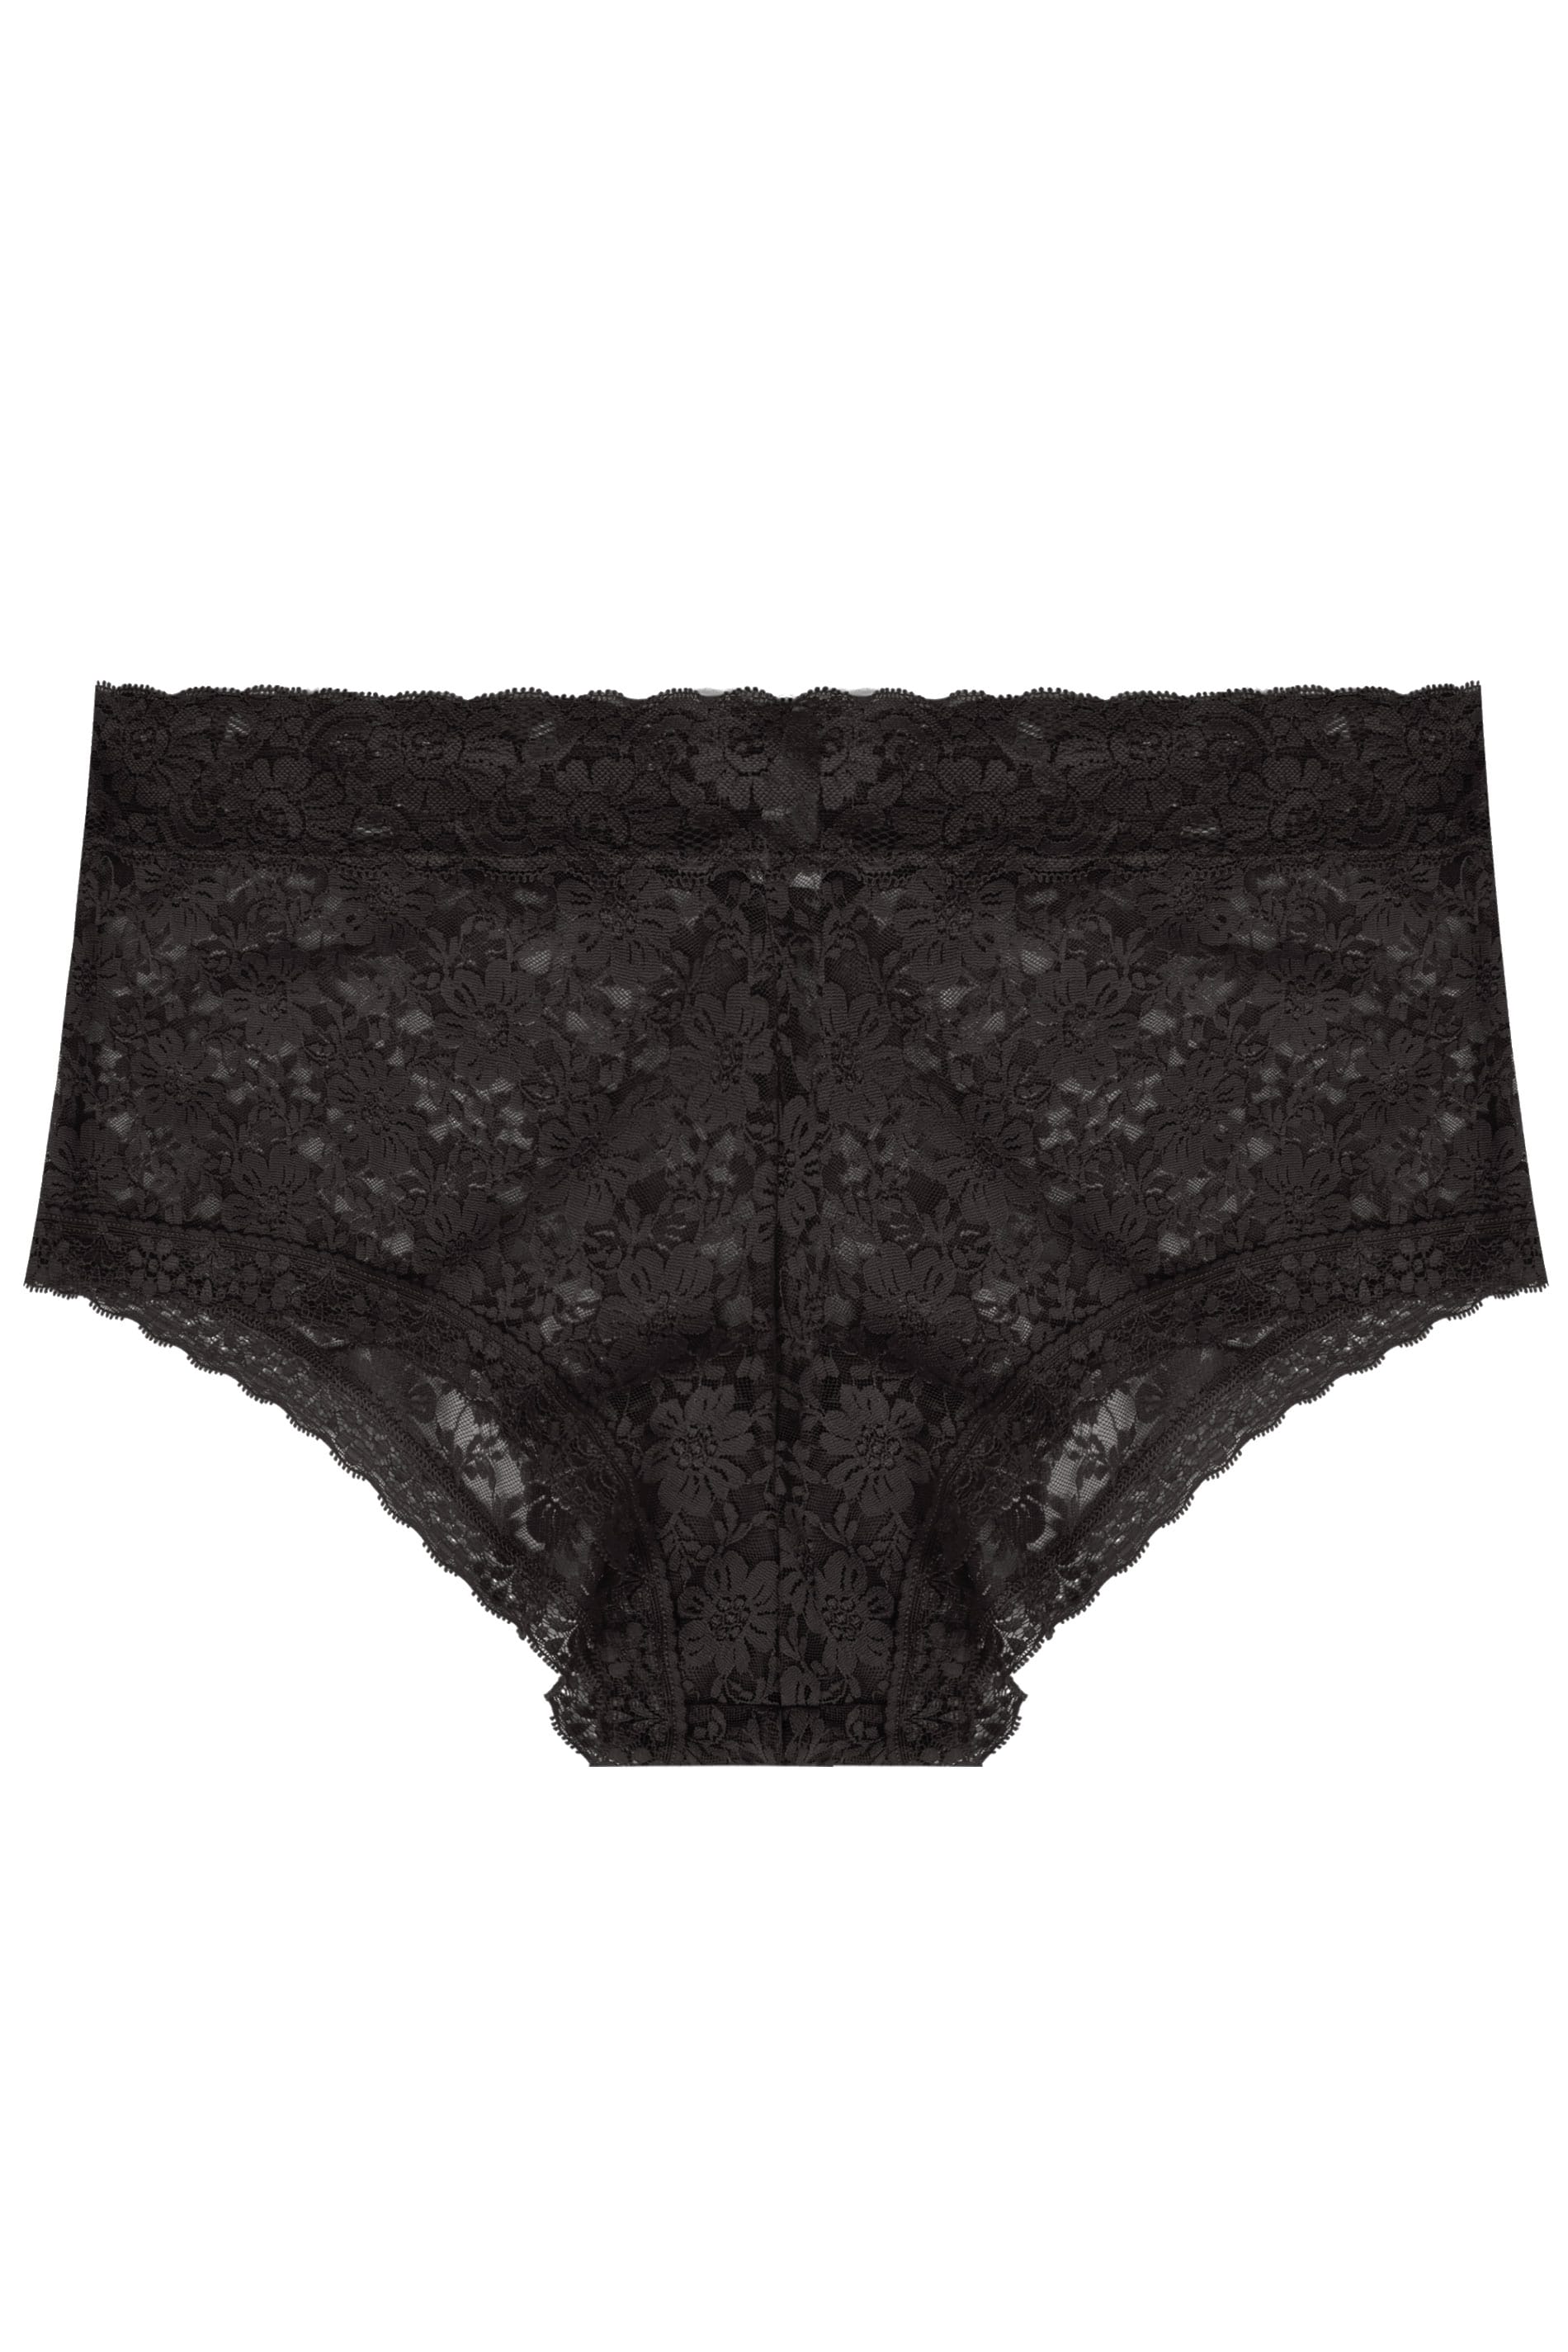 Black Floral Lace Mid Rise Shorts | Yours Clothing 2